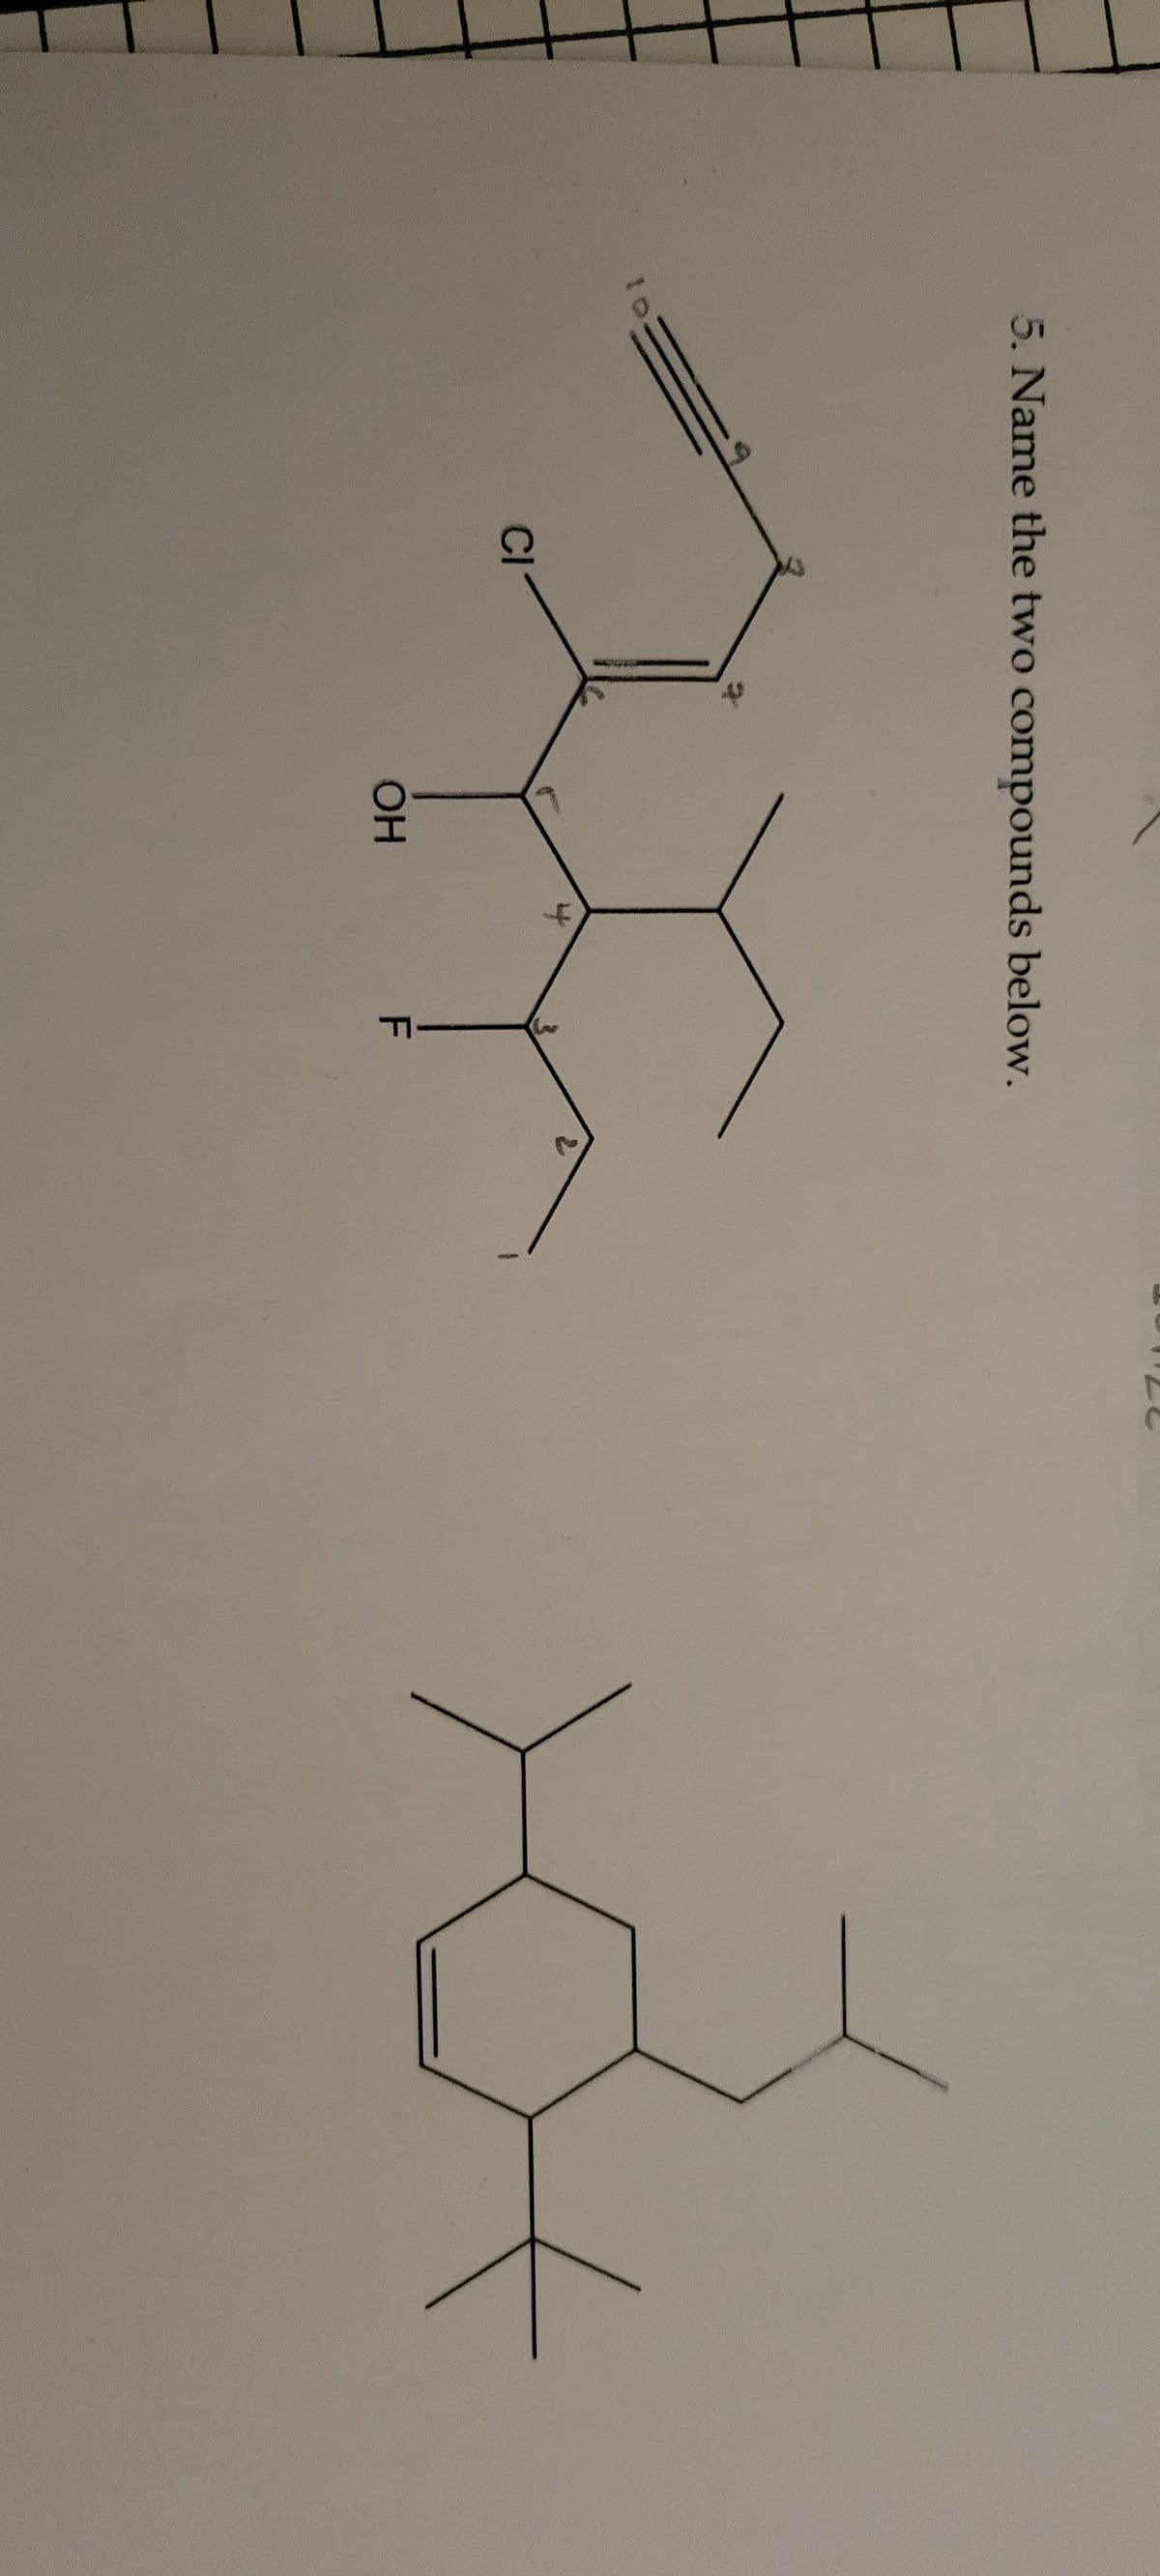 5. Name the two compounds below.
CI
OH
bul
F
de